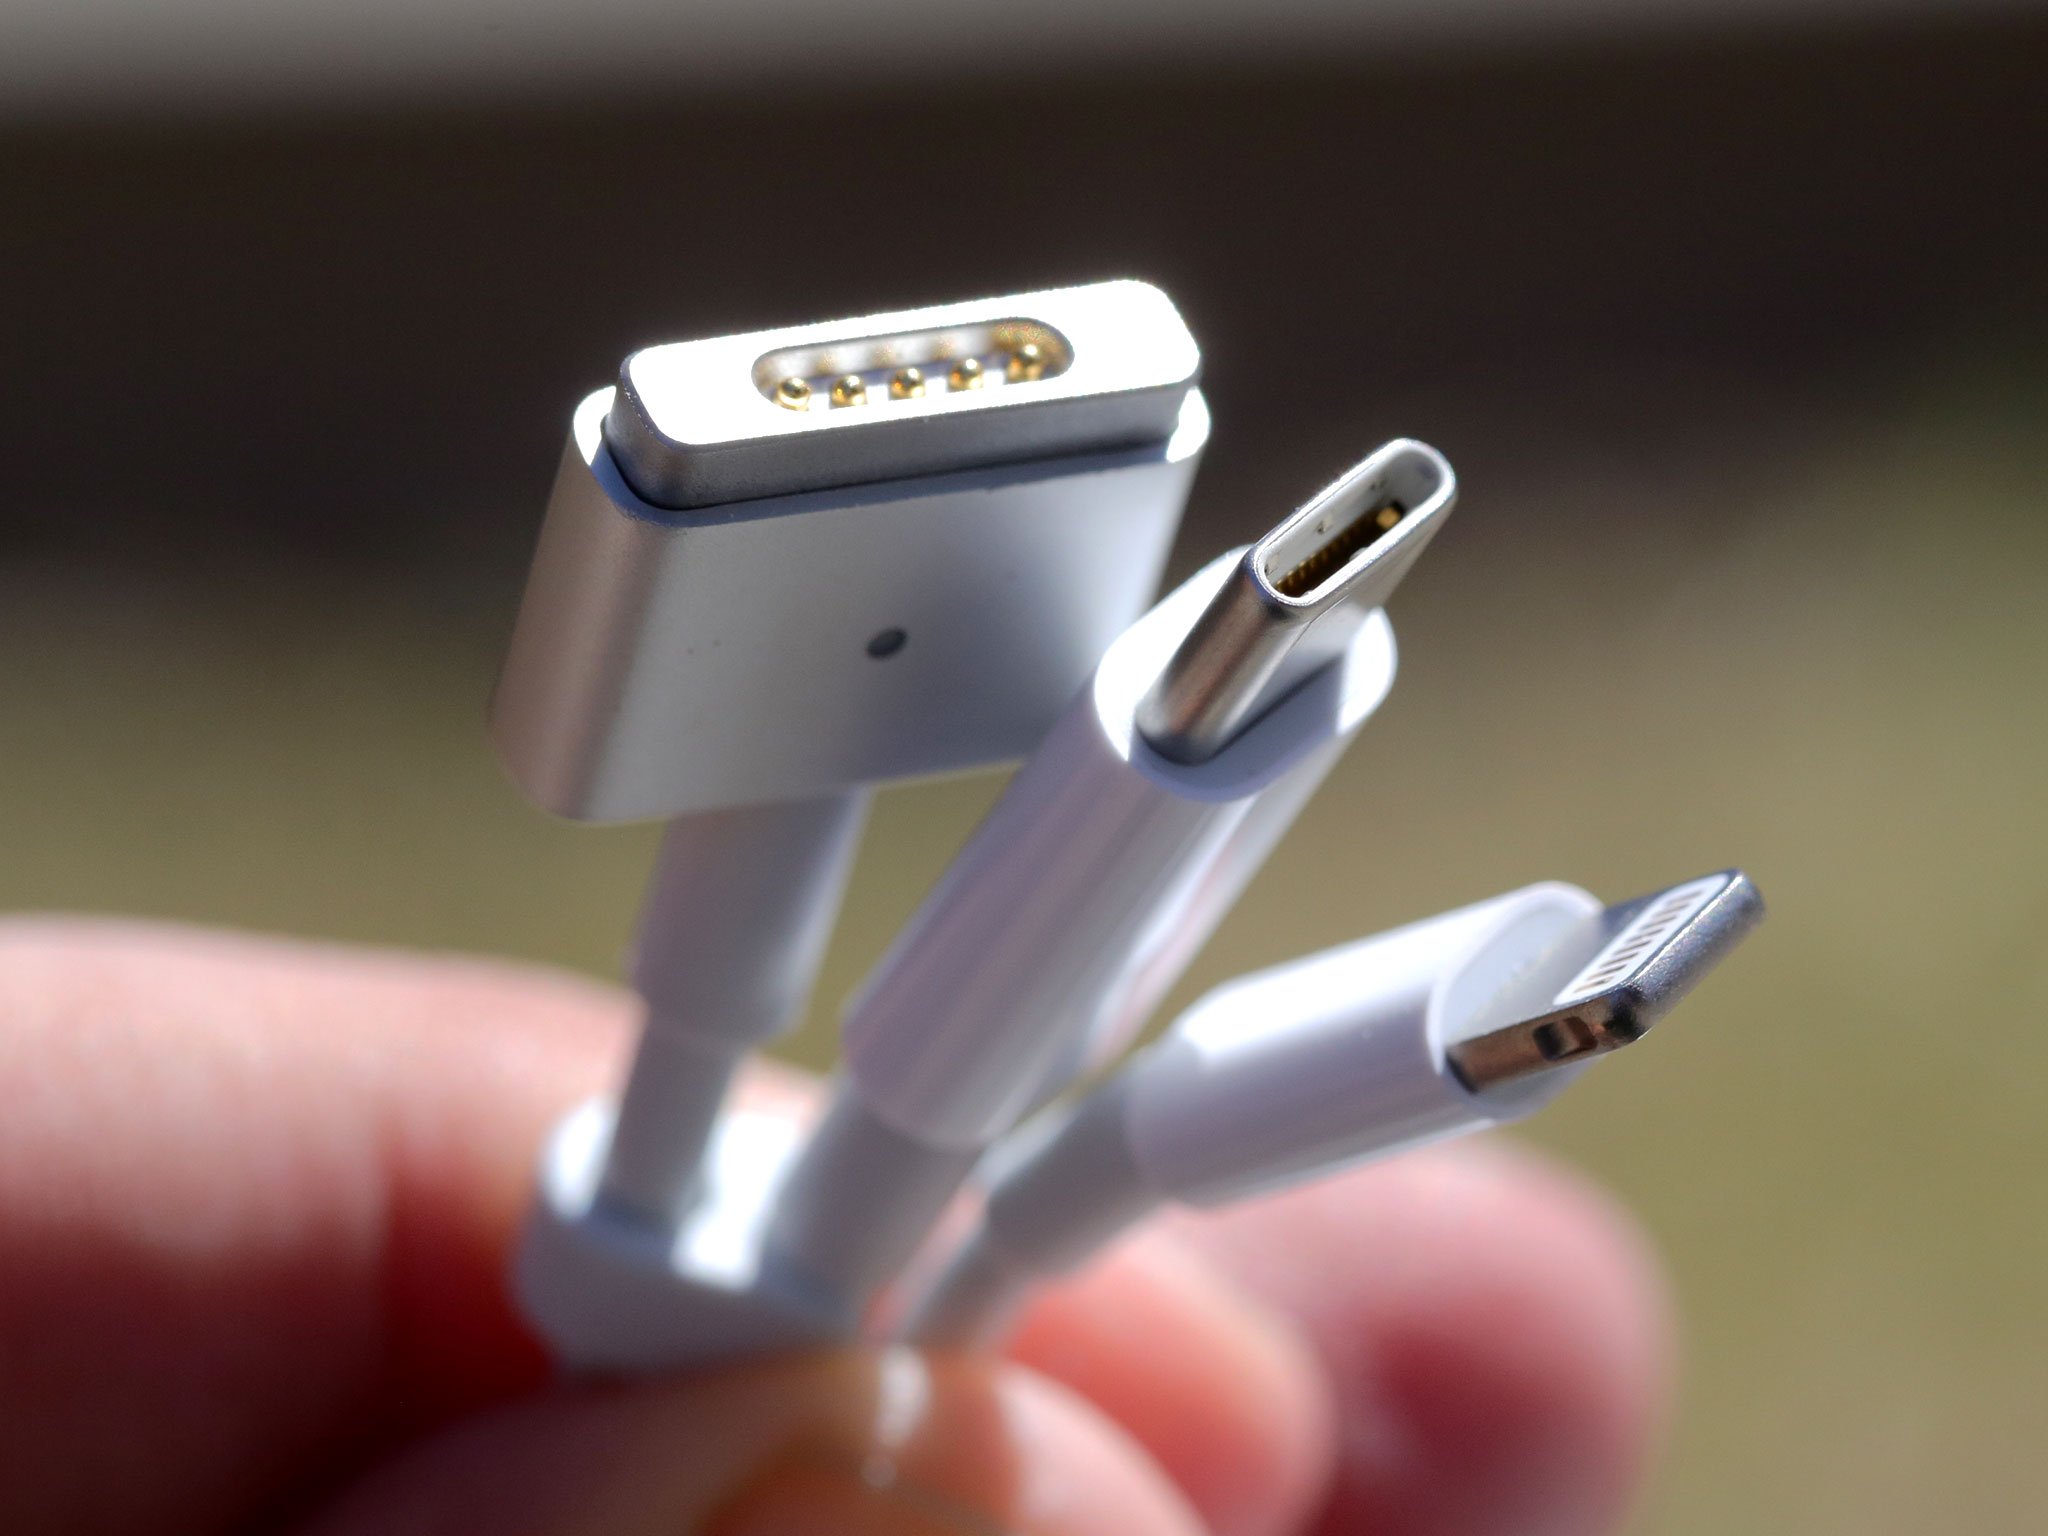 Why doesn't the iPhone use USB-C instead of Lightning?